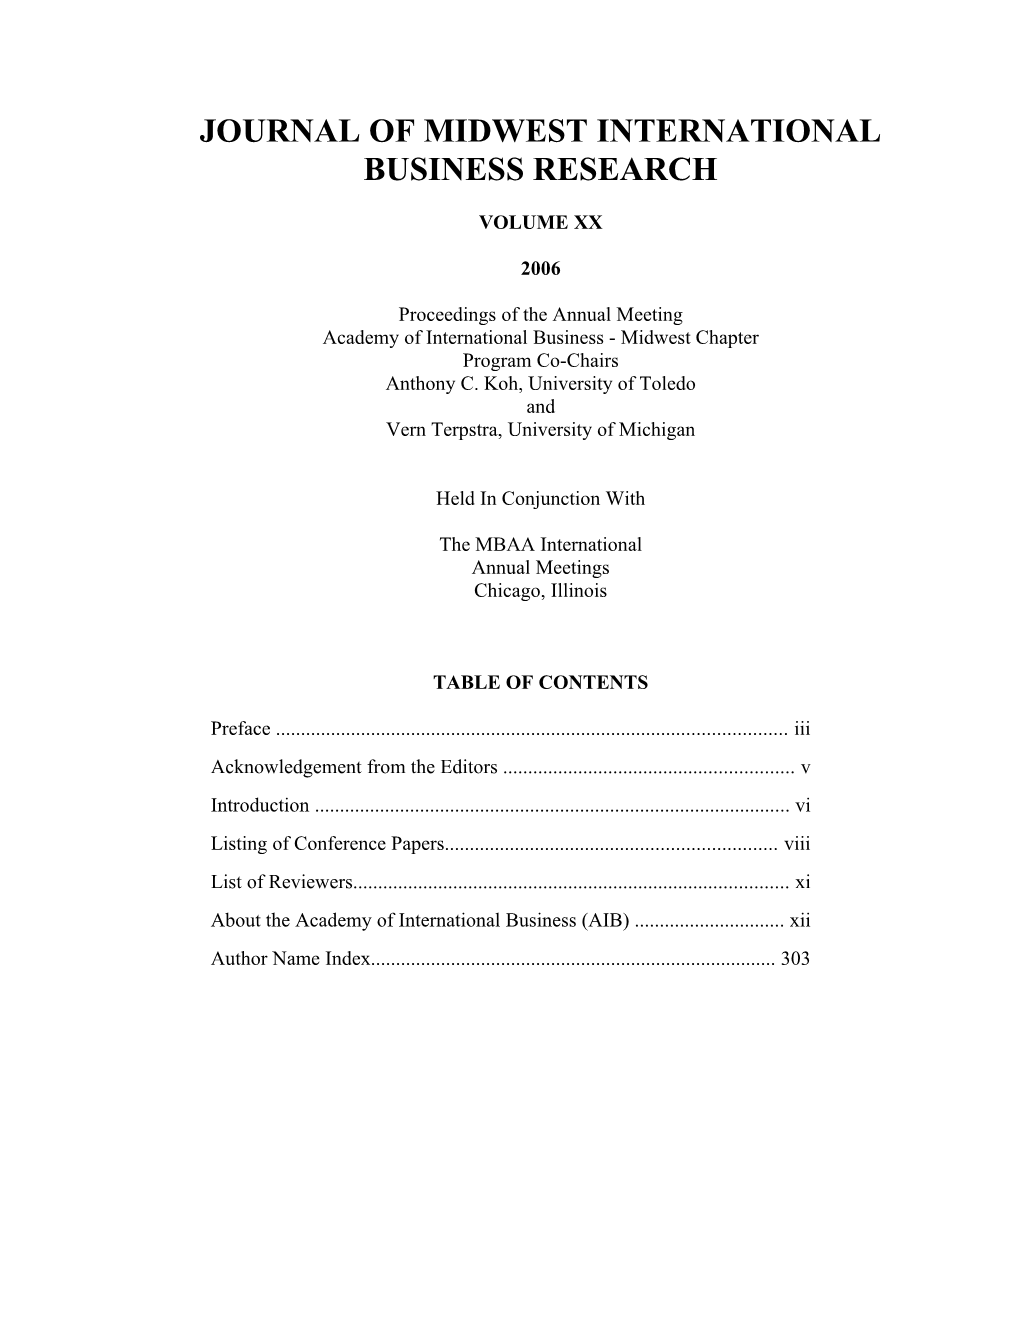 Journal of Midwest International Business Research